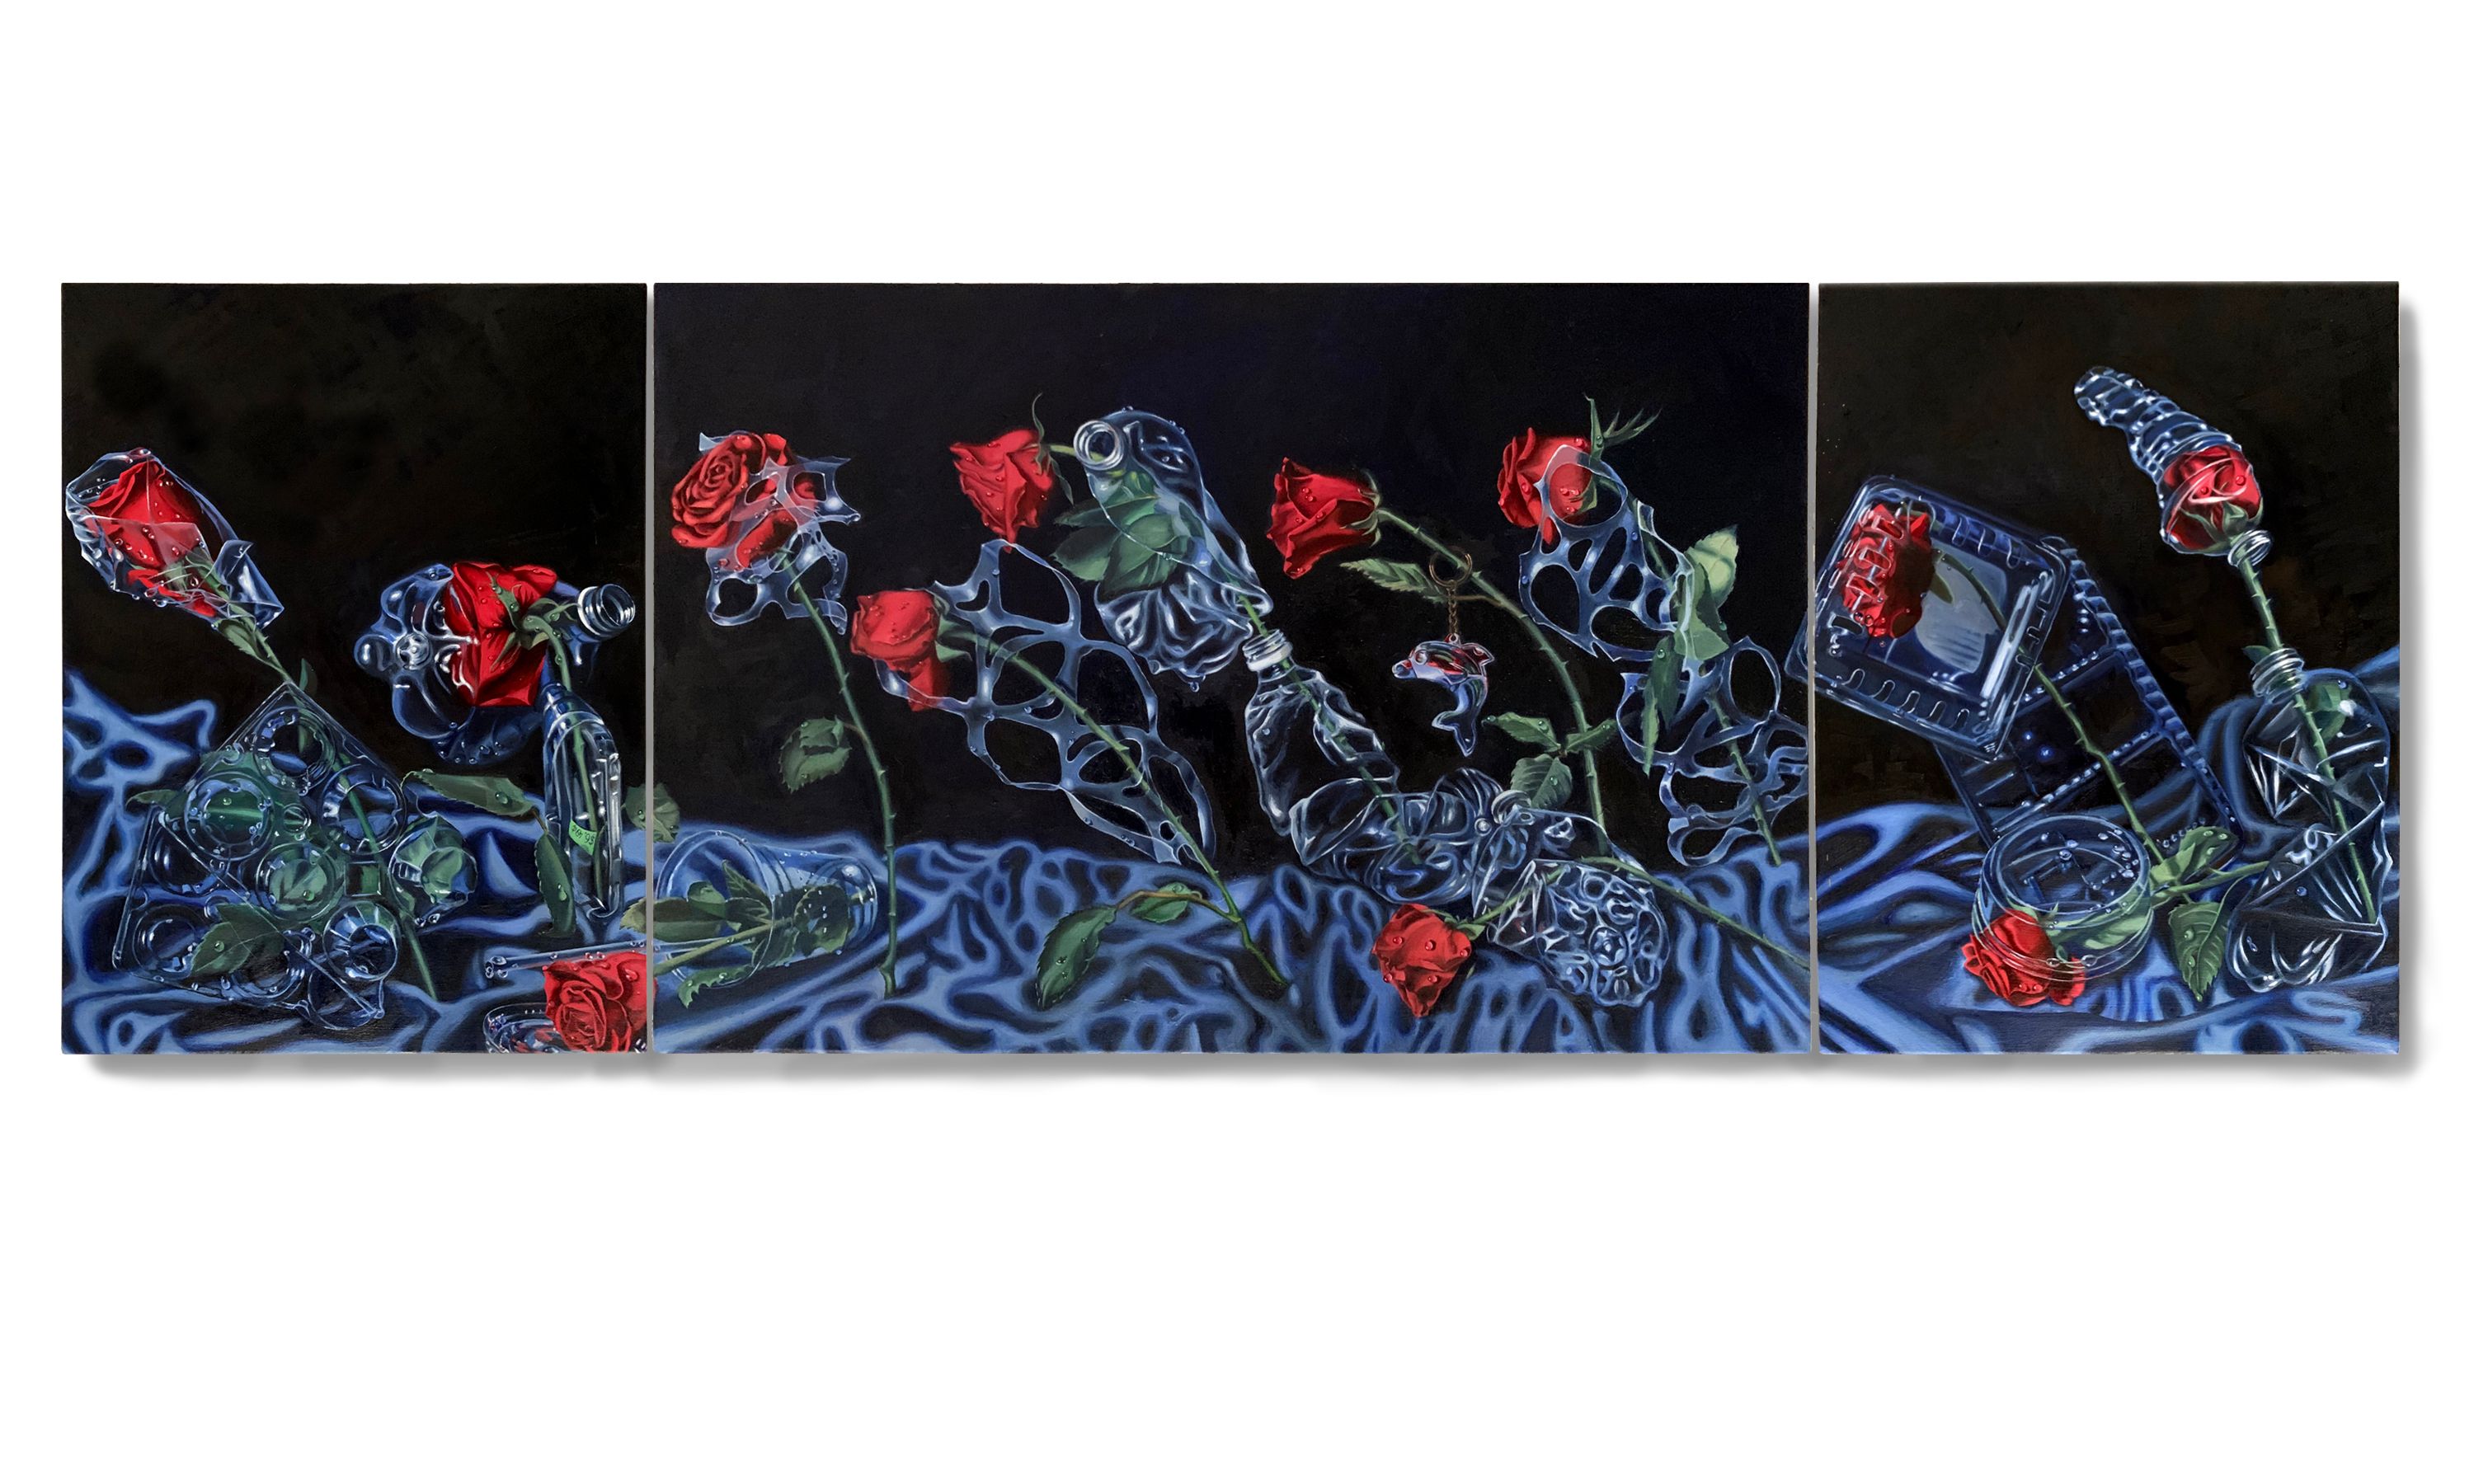 Bed of Roses (Triptych) 20x60 total 2021